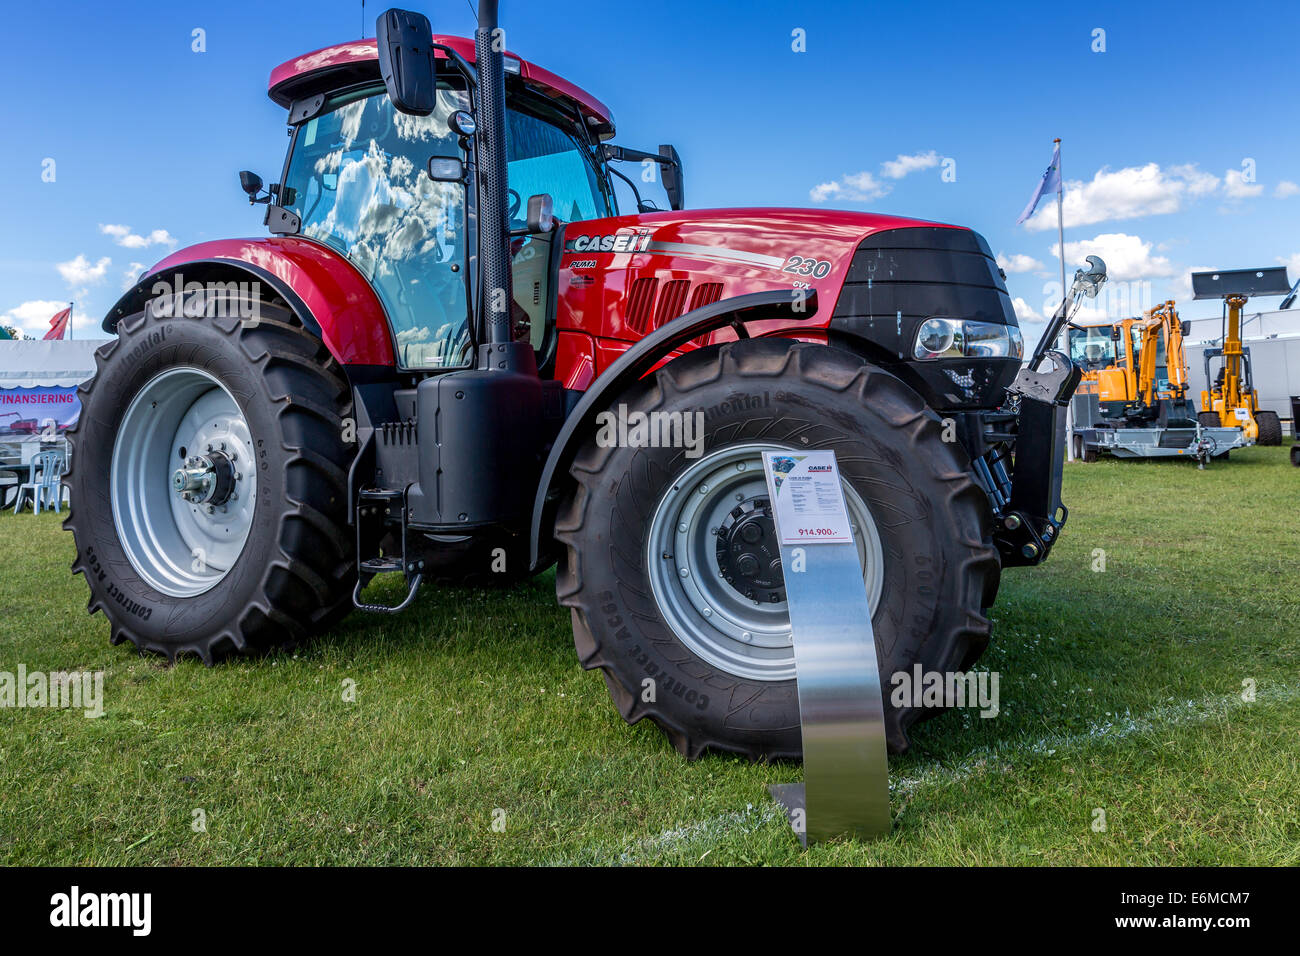 Display of agricultural equipment, Agricultural show, Case IH Puma tractor,  Funen Agricultural show, Odense, Denmark Stock Photo - Alamy